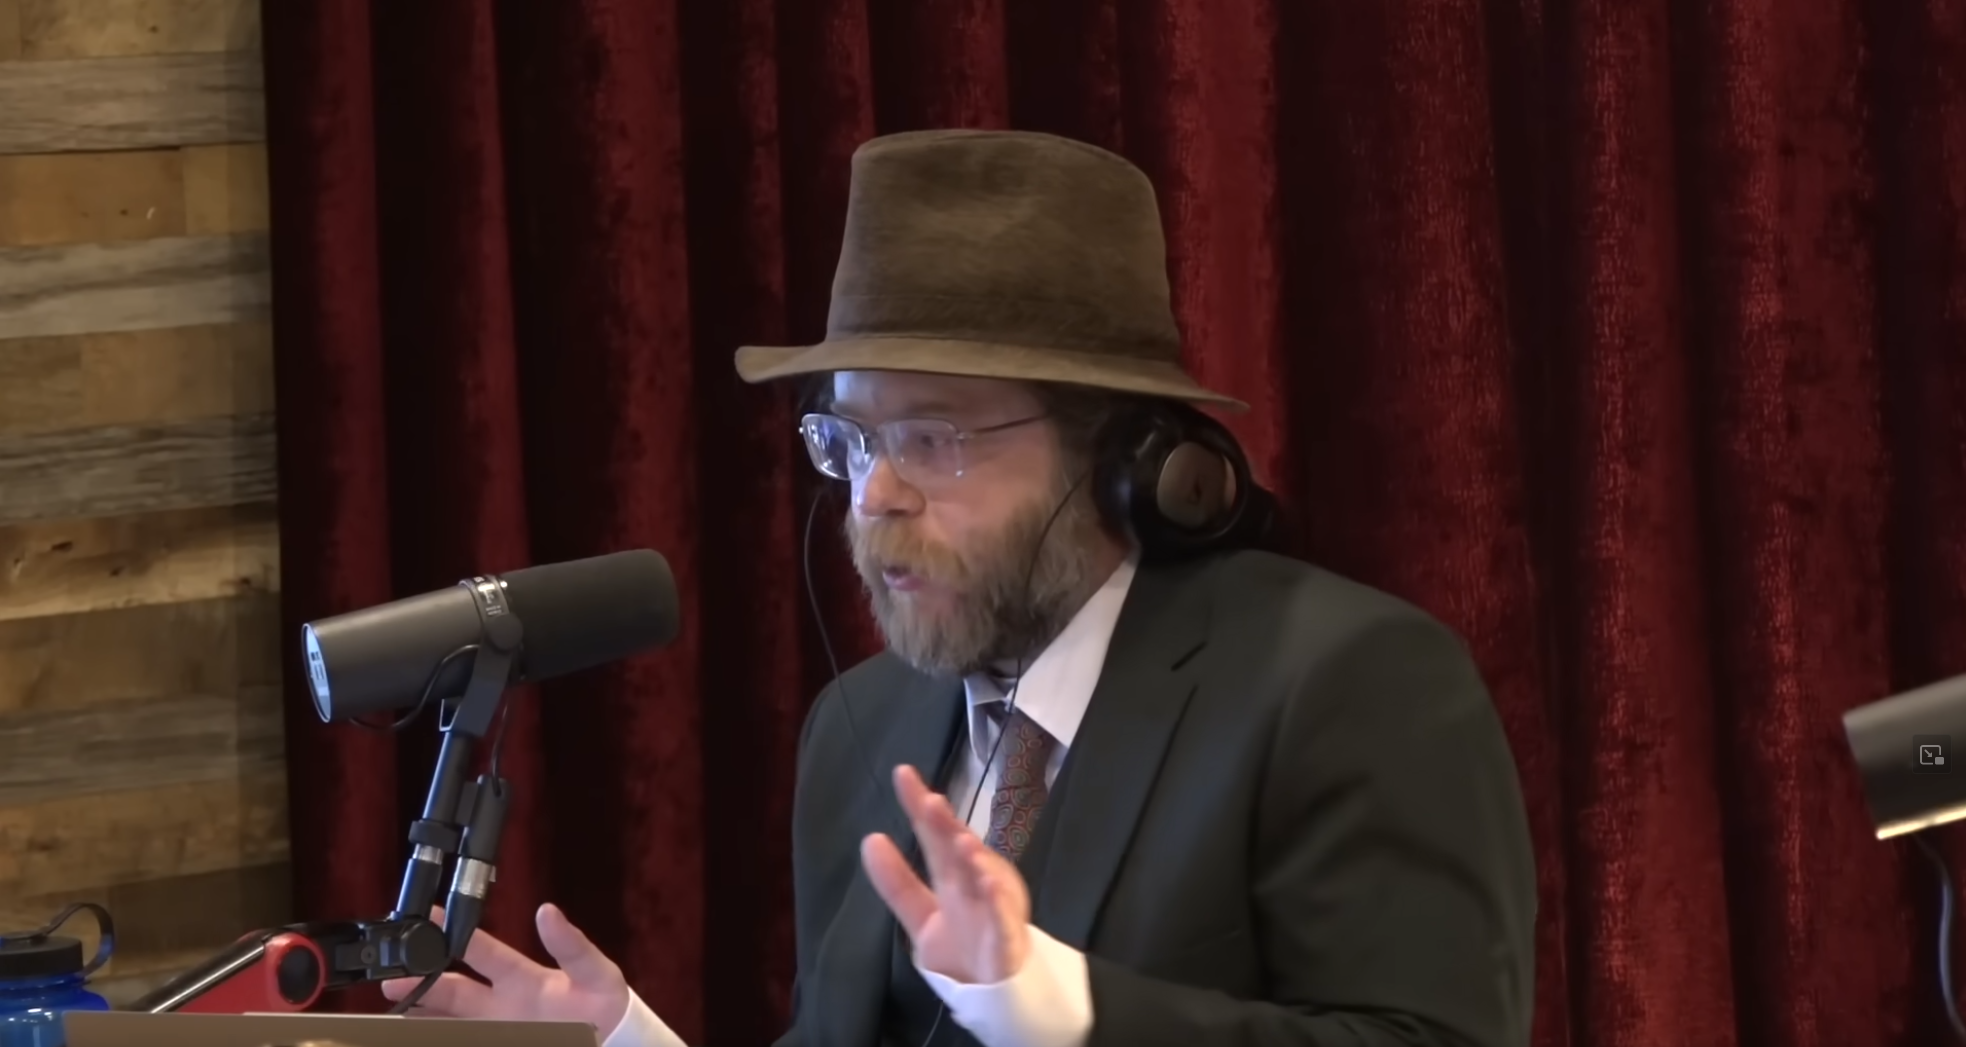 A screenshot of Flint Dibble during the Roe Rogan Experience podcast.